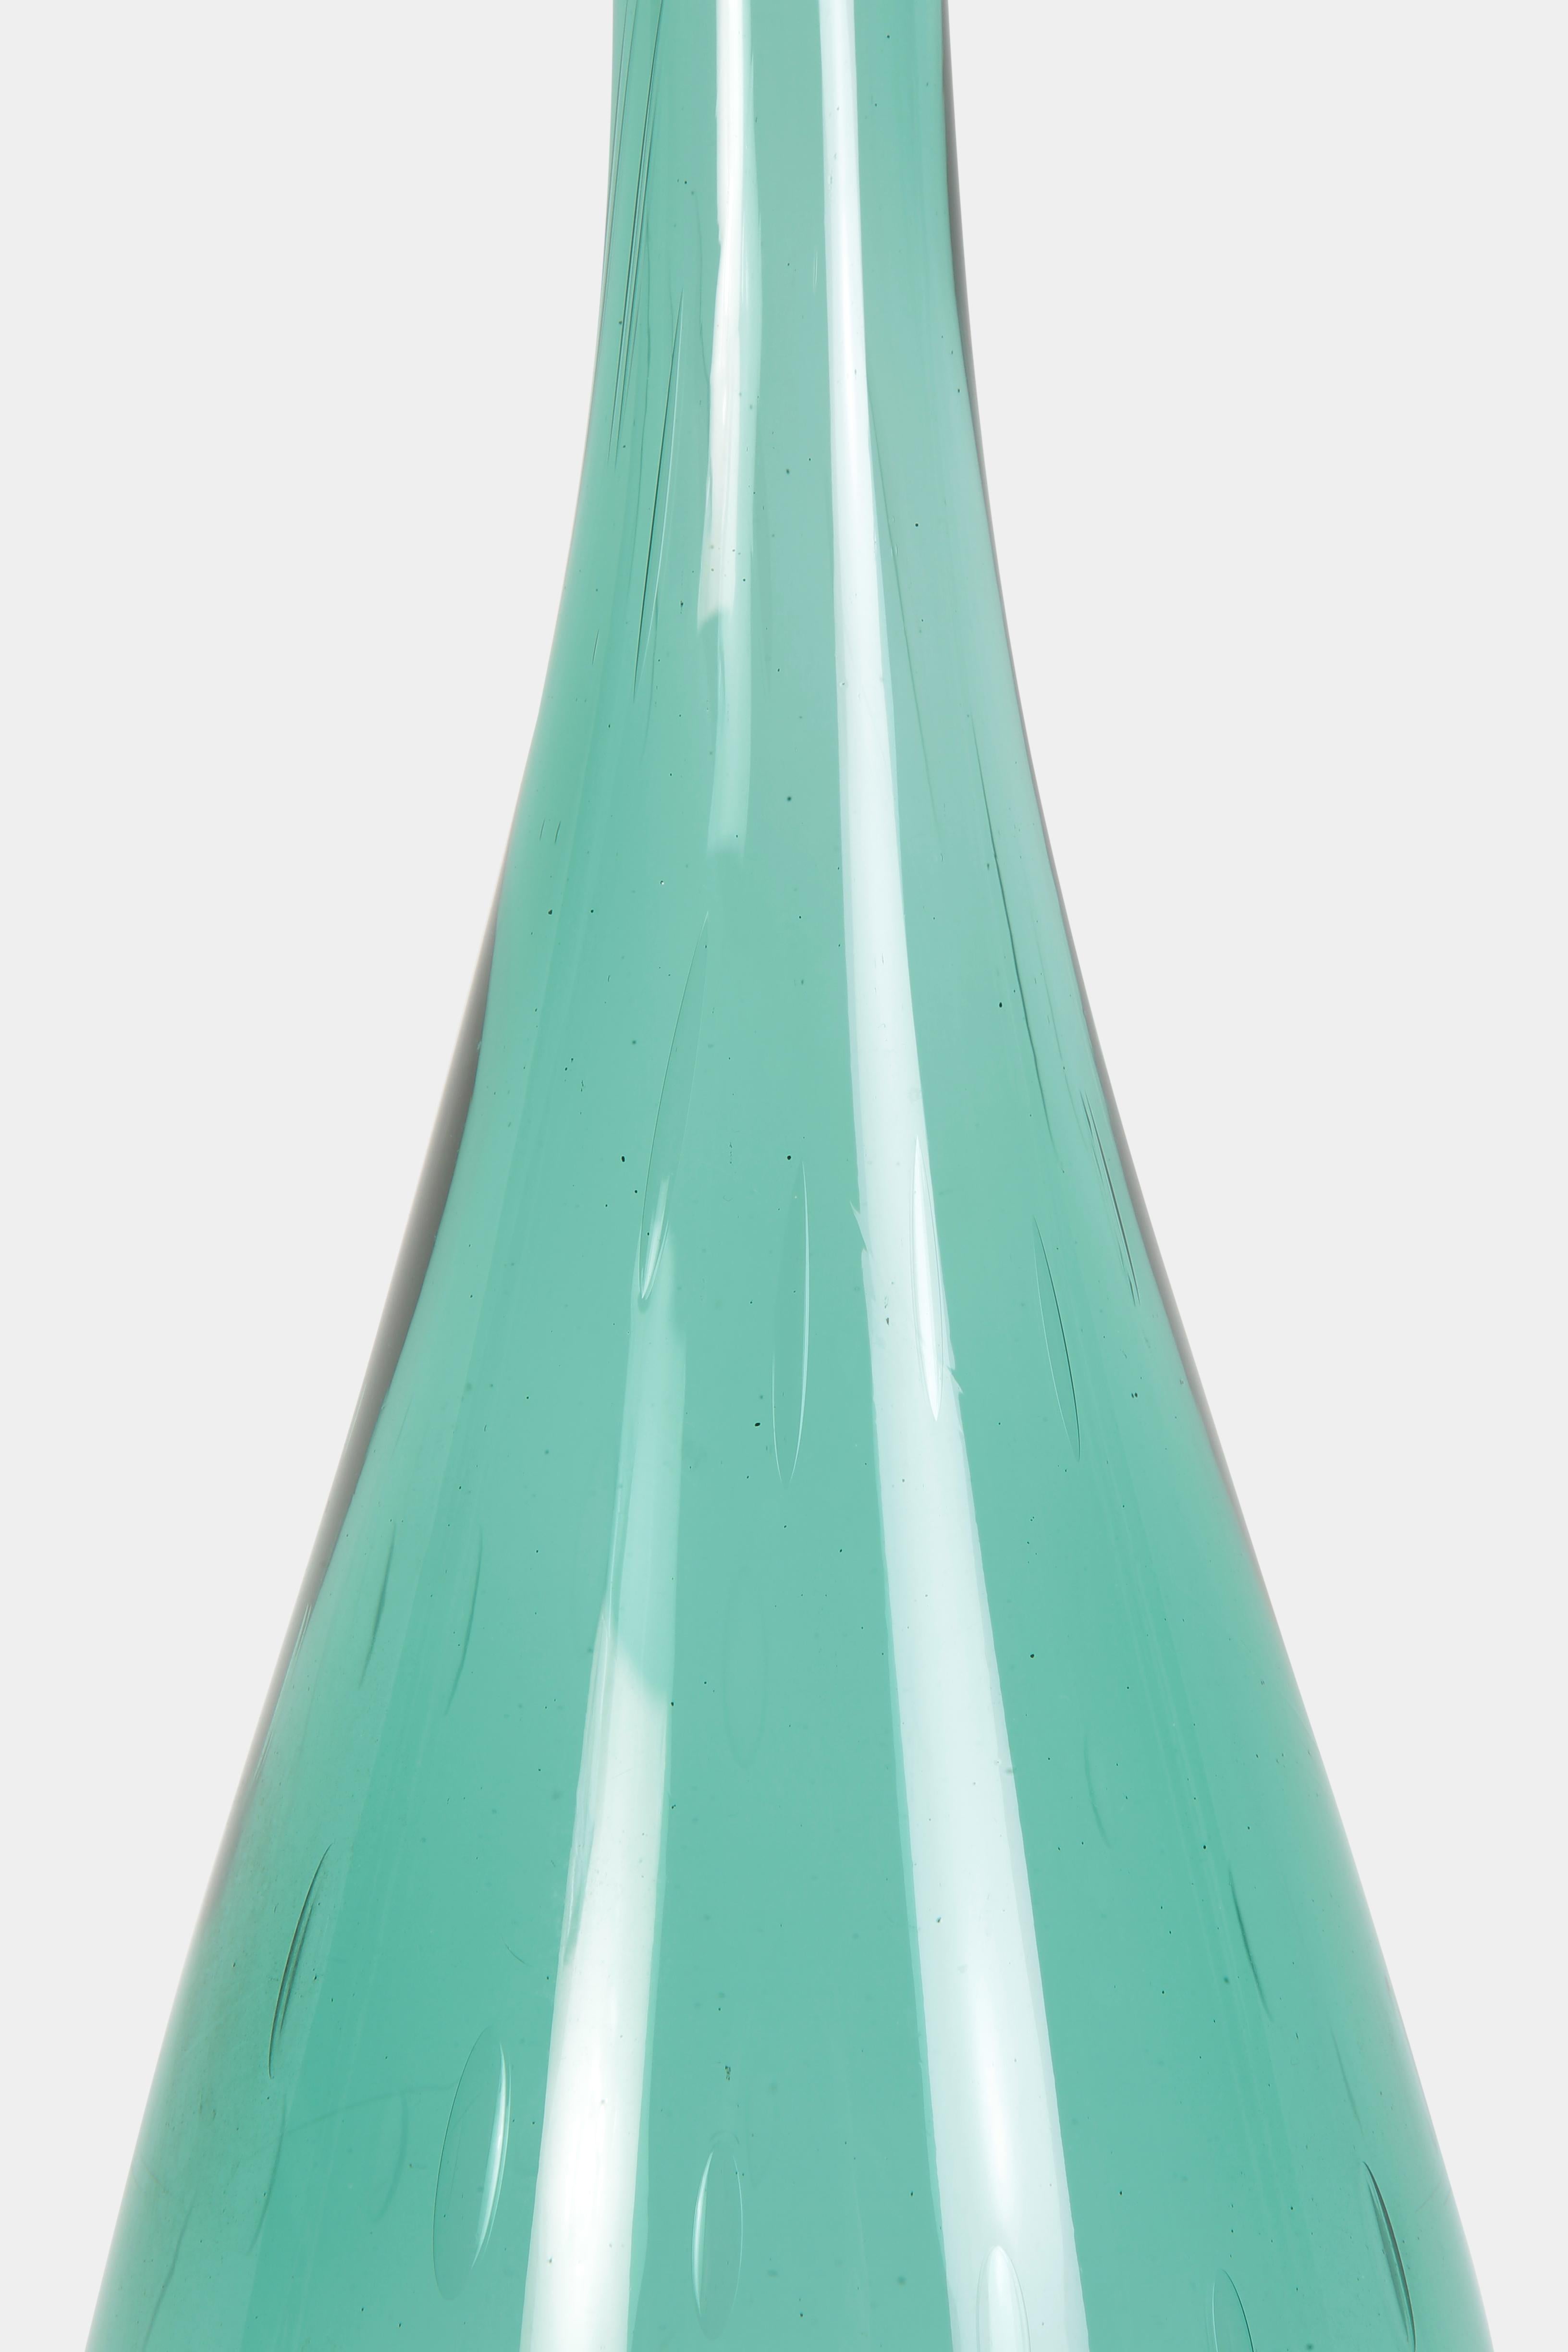 Large Vetro Verde d’Empoli Vase, 1950s In Good Condition For Sale In Basel, CH